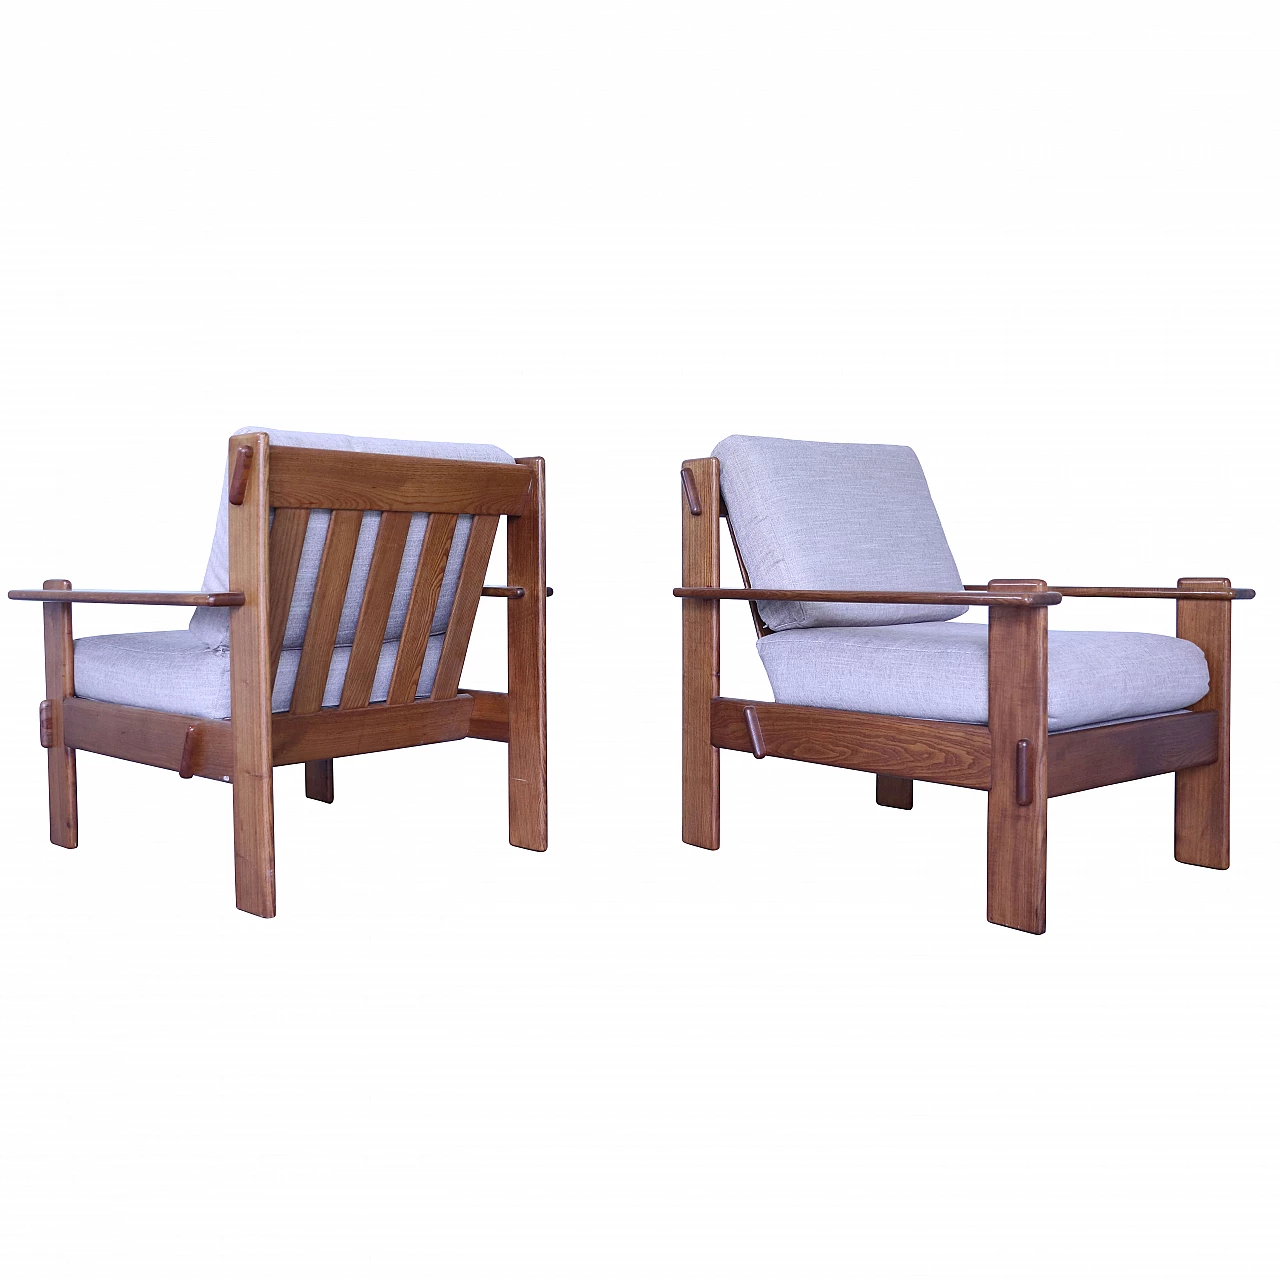 Pair of armchairs in chestnut wood and fabric 1157587